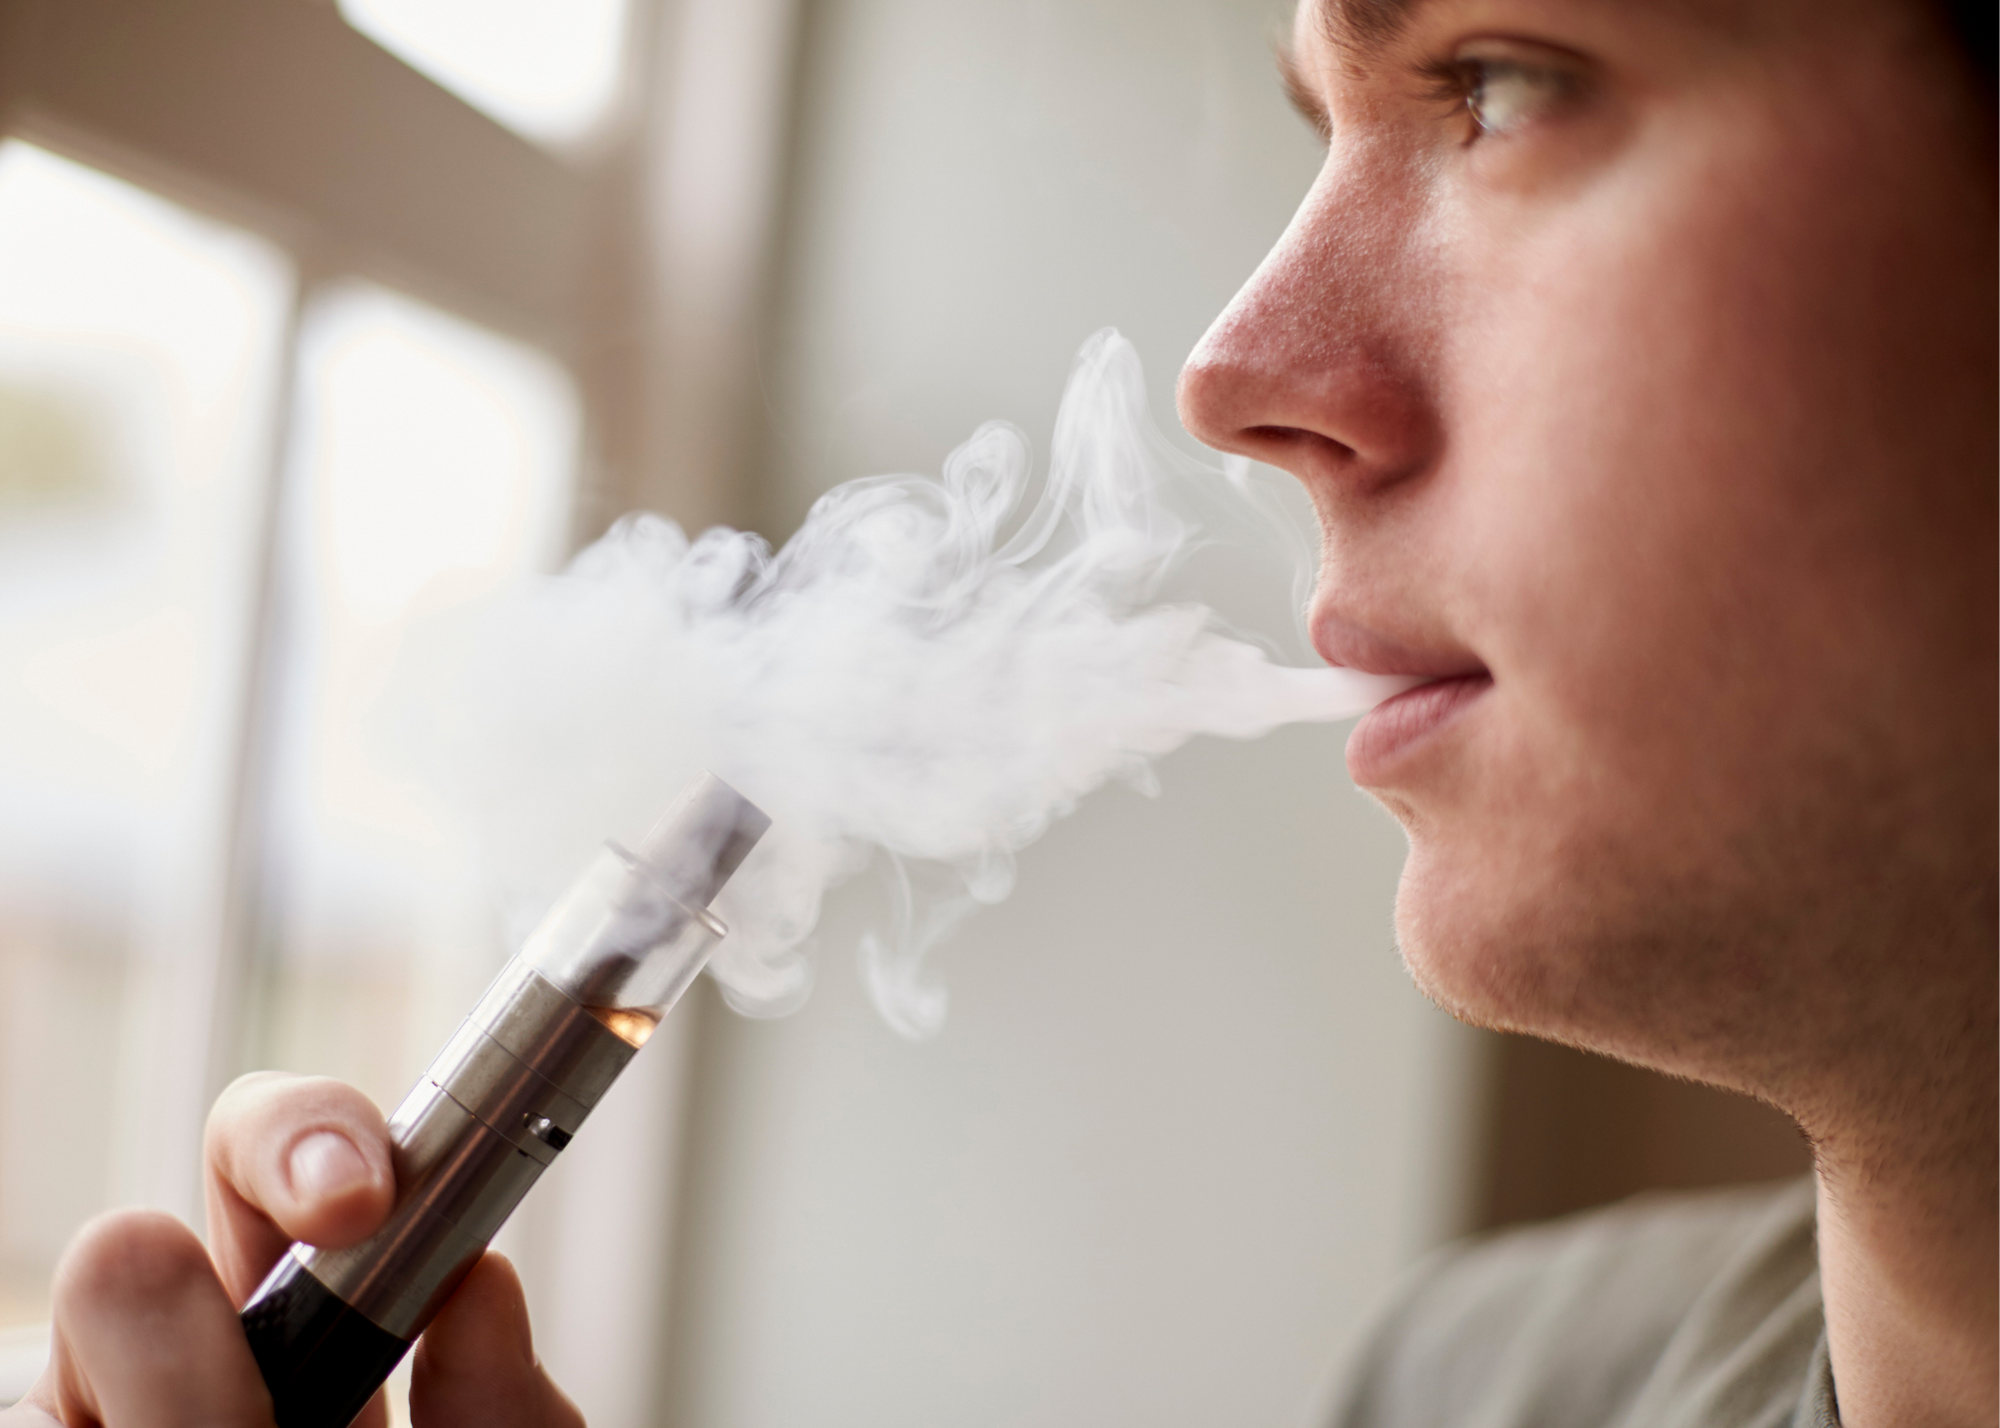 Youth vaping declined in 2020 and 2021. With kids back in school, what comes next?